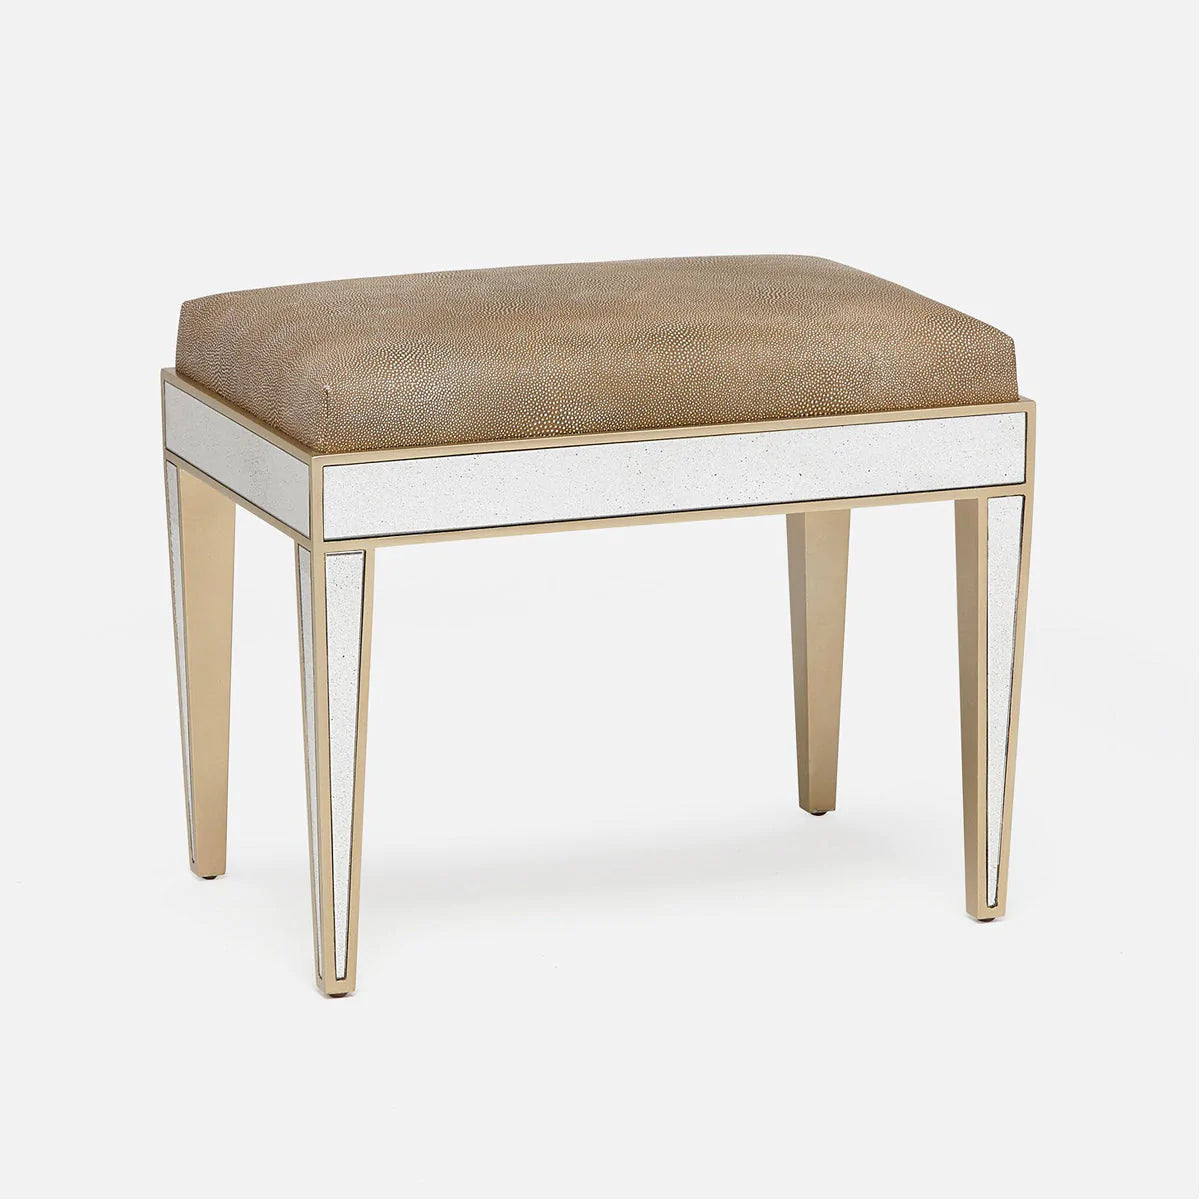 Made Goods Mia Upholstered Mirrored Single Bench in Weser Fabric